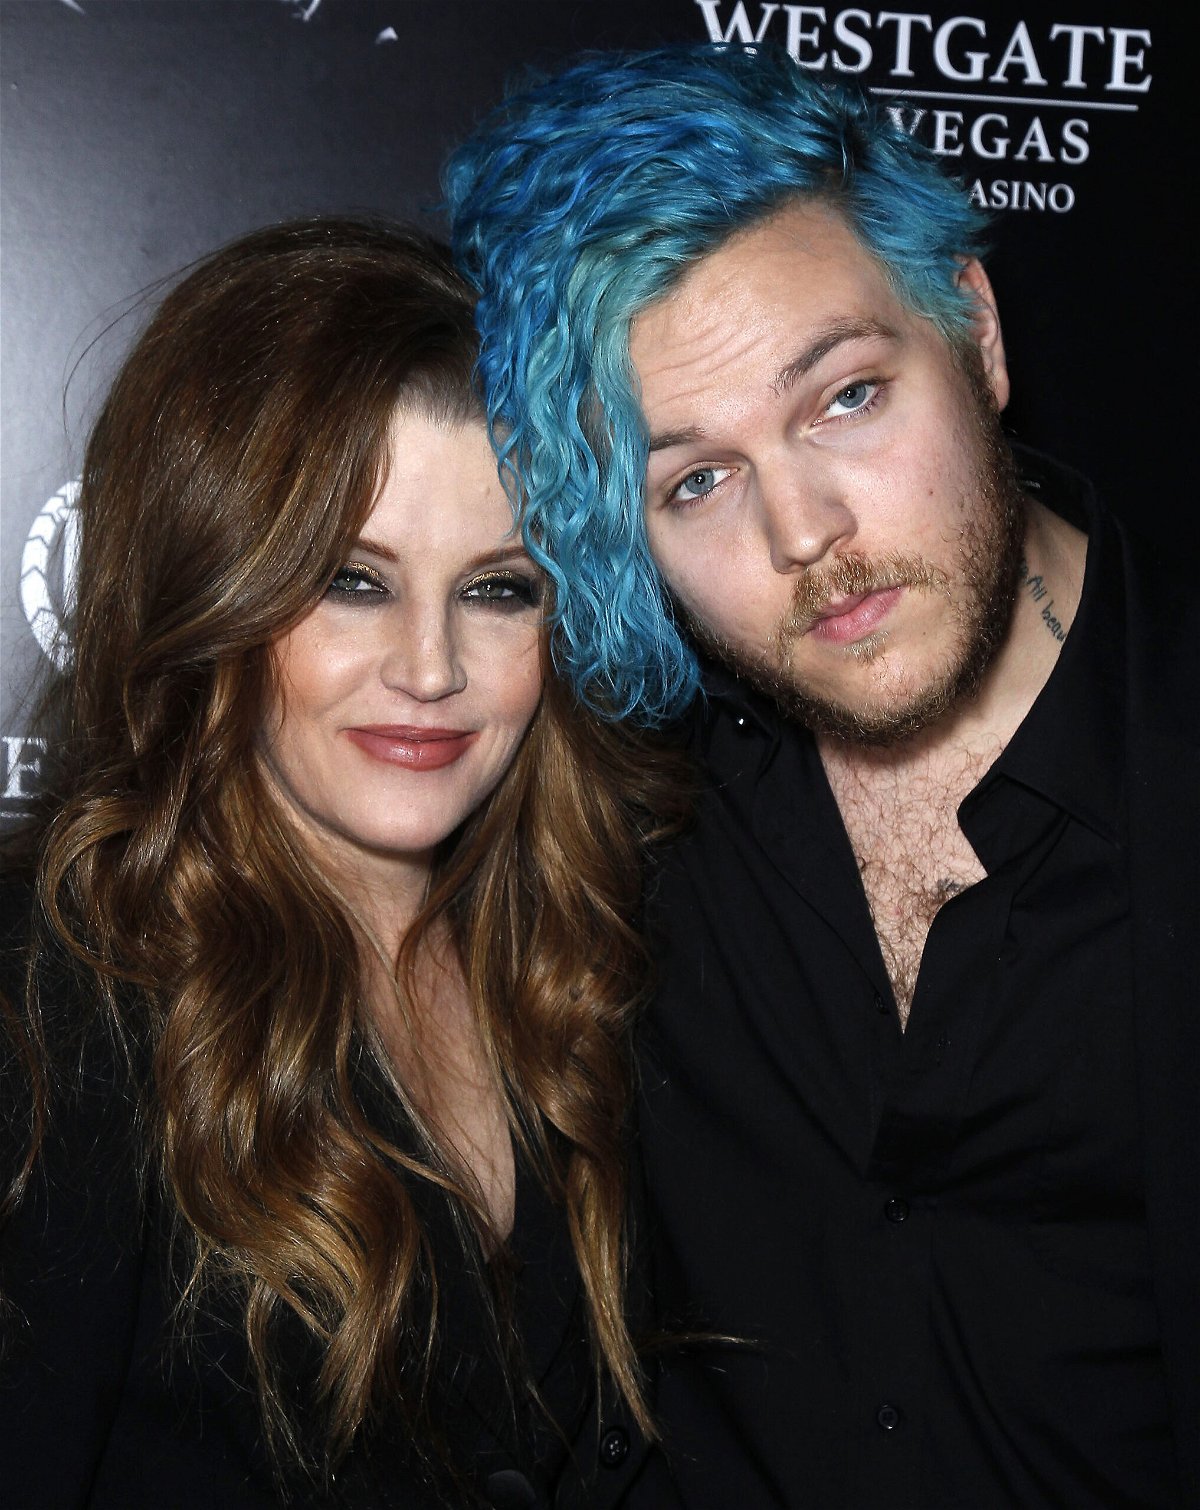 <i>MJT/MediaPunch/AP</i><br/>Lisa Marie Presley with her son Benjamin Keough in 2015. Lisa Marie Presley spoke recently about the grief she's experienced after losing her son.